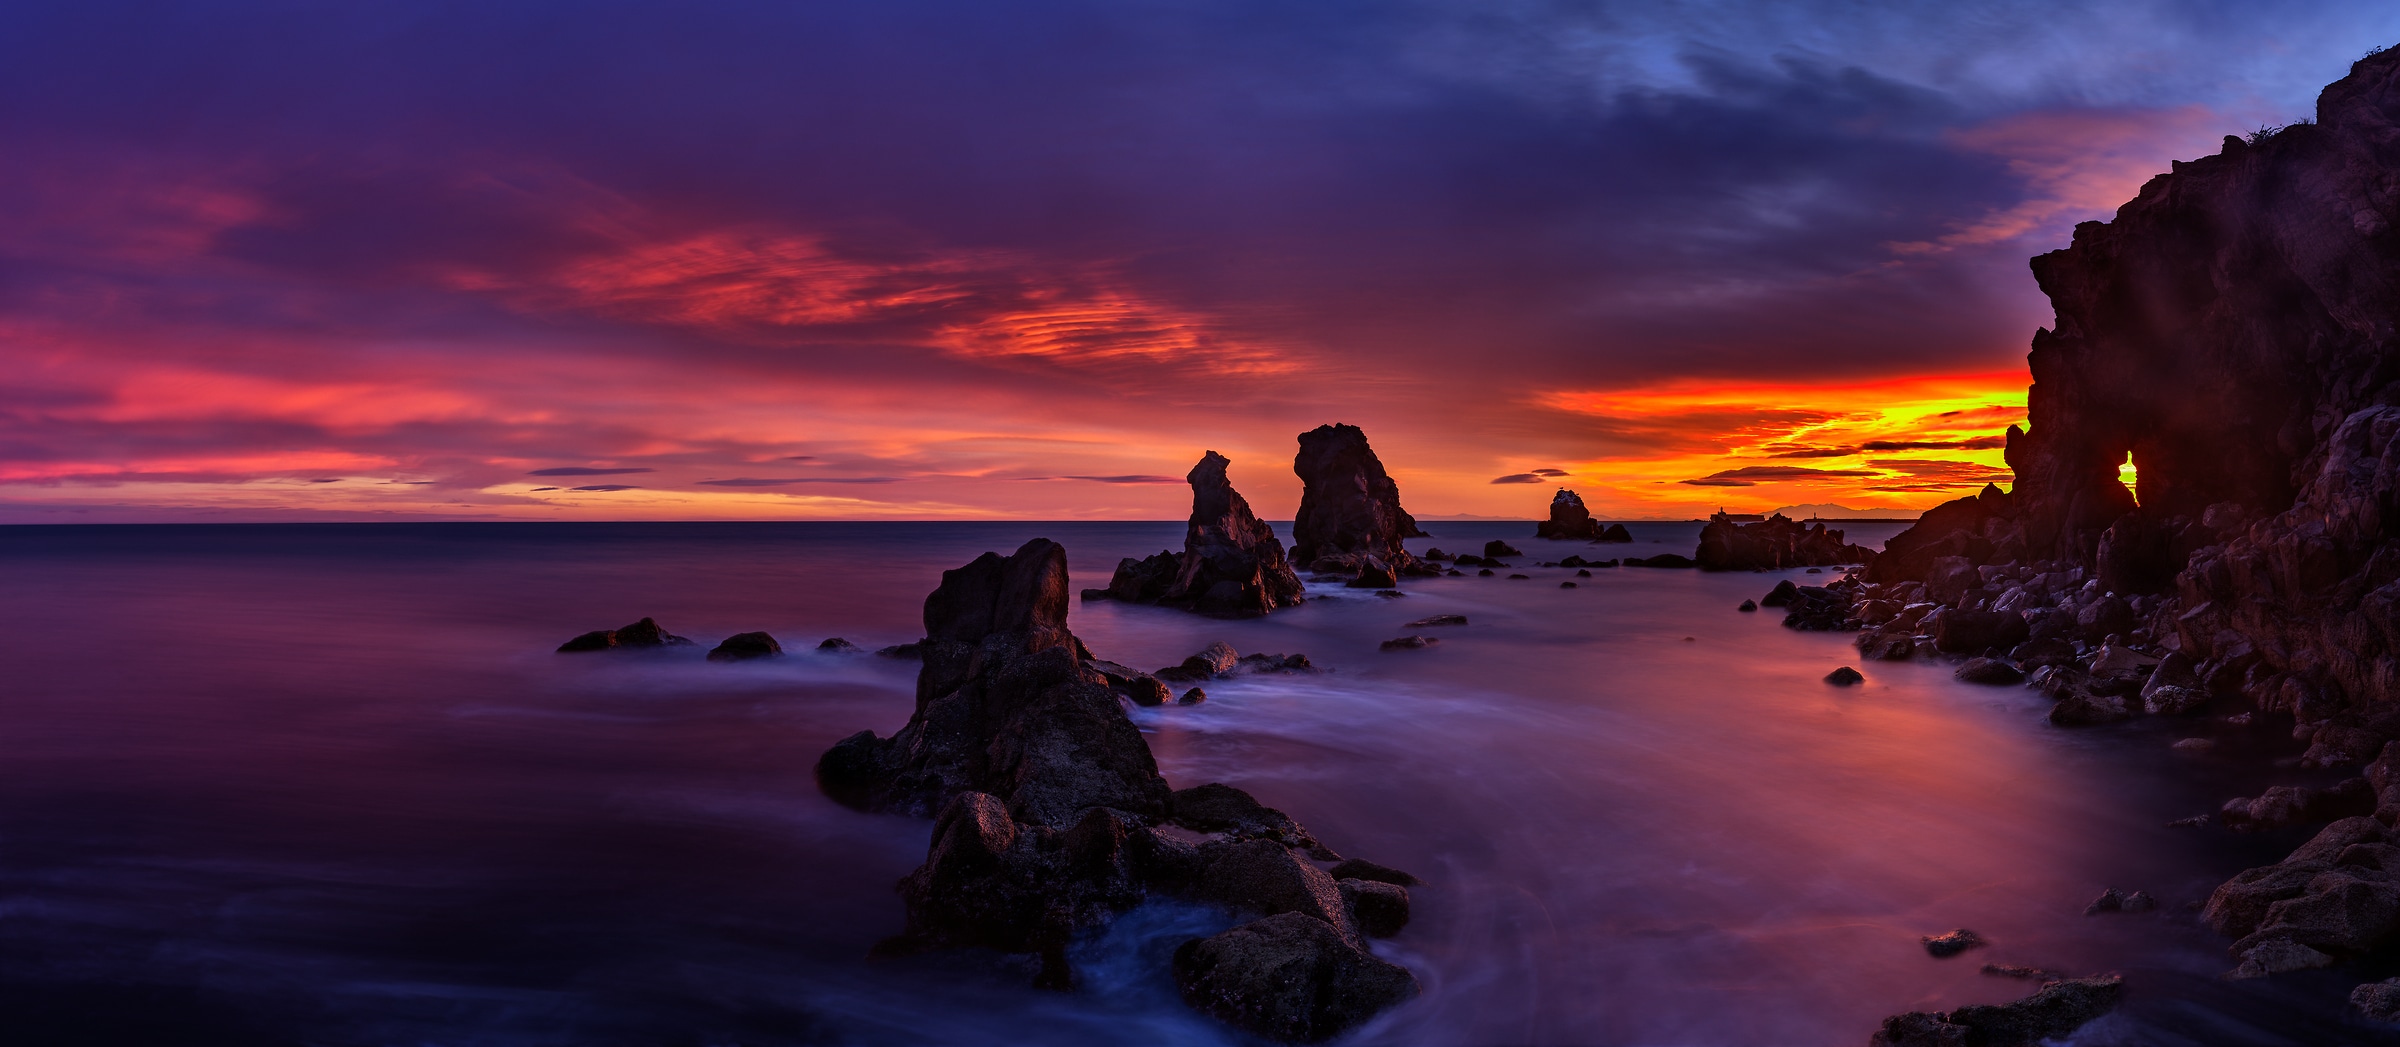 120 megapixels! A very high resolution, large-format VAST photo print of a dark seascape sunset; photograph created by David Meaux in Le Cap d'Agde, Hérault, Occitanie, France.